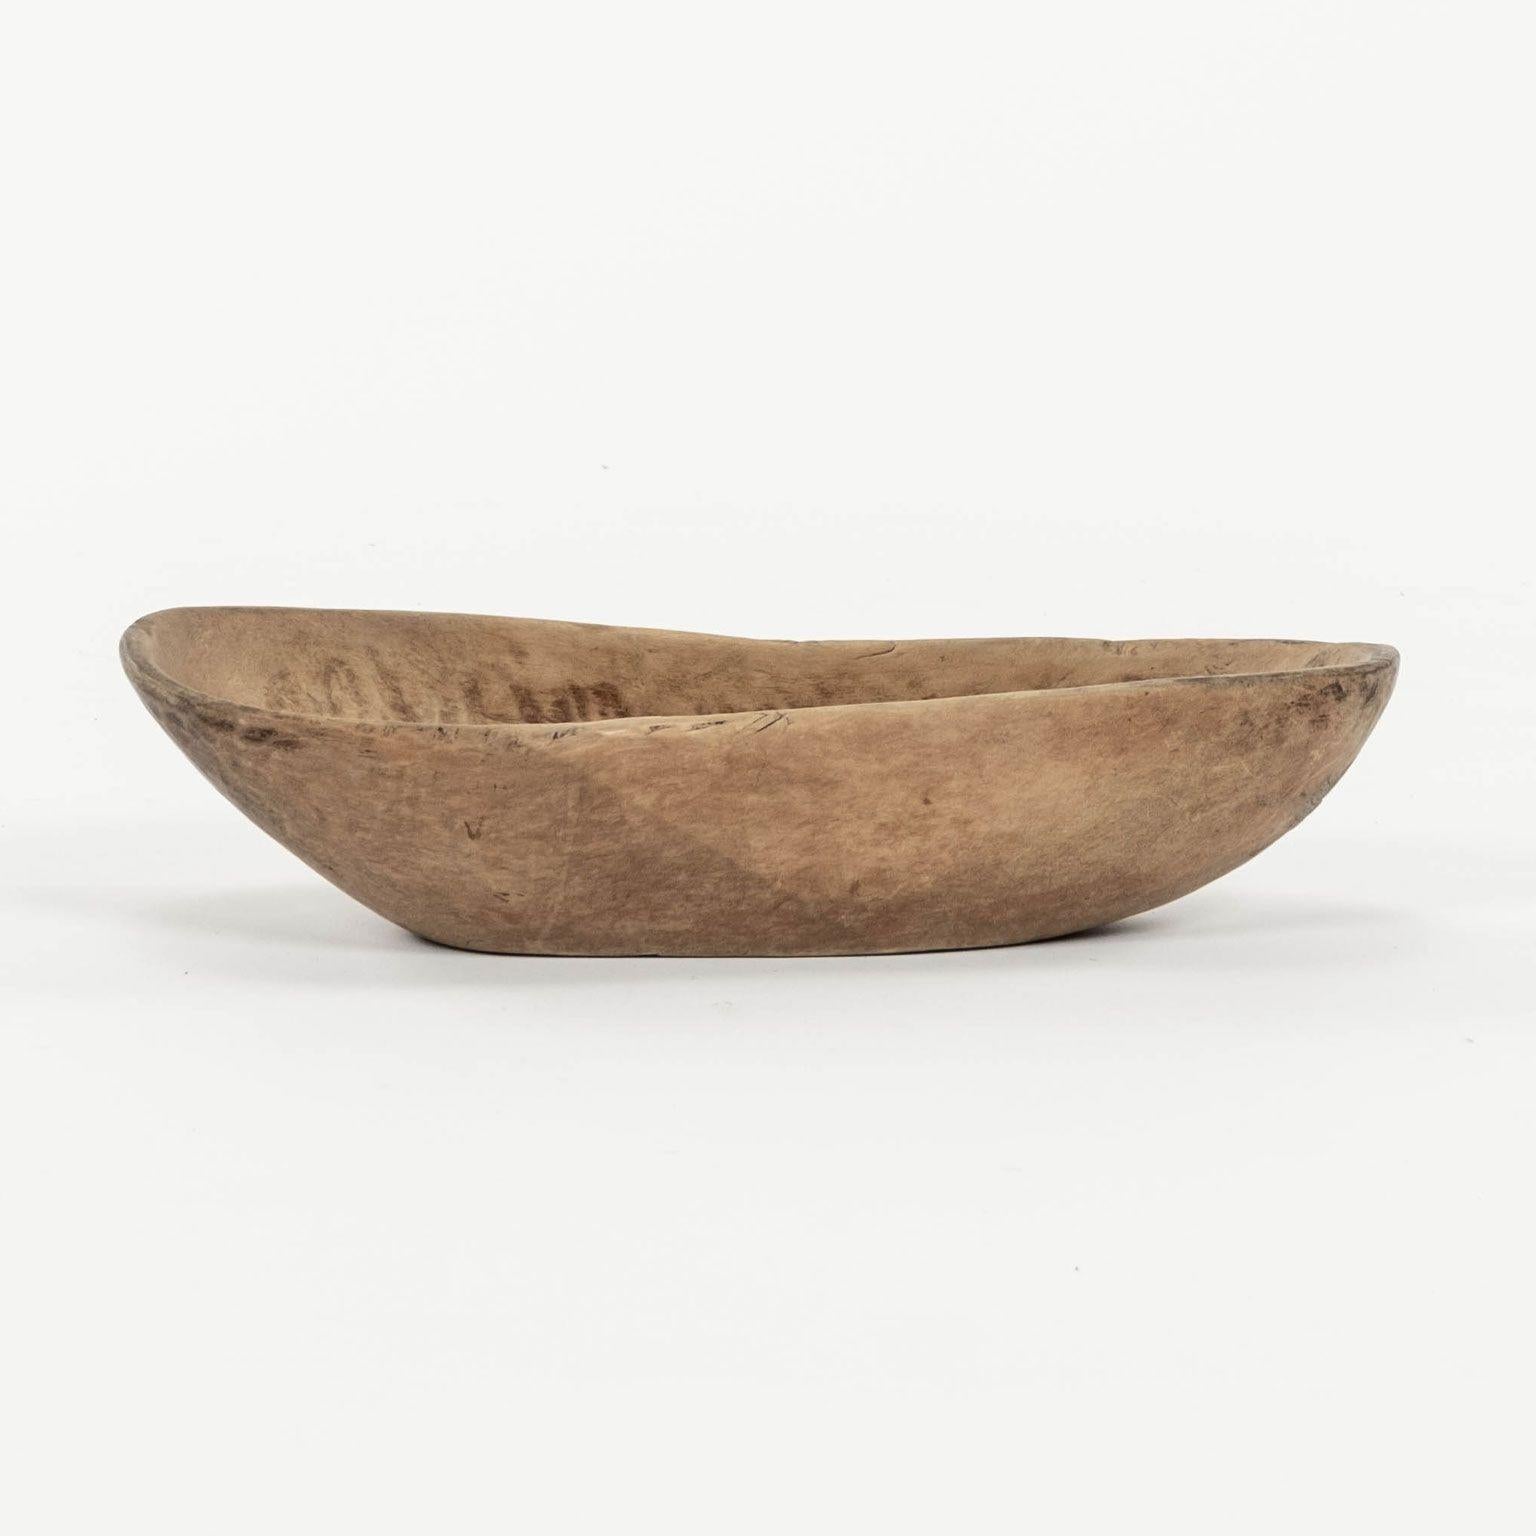 Swedish dugout branch shape trough bowl. Scrubbed, pale light brown color. Inscribed with runic characters underneath. Dates to early 19th century.

Note: Due to regional changes in humidity and climate during shipping, antique wood may shrink